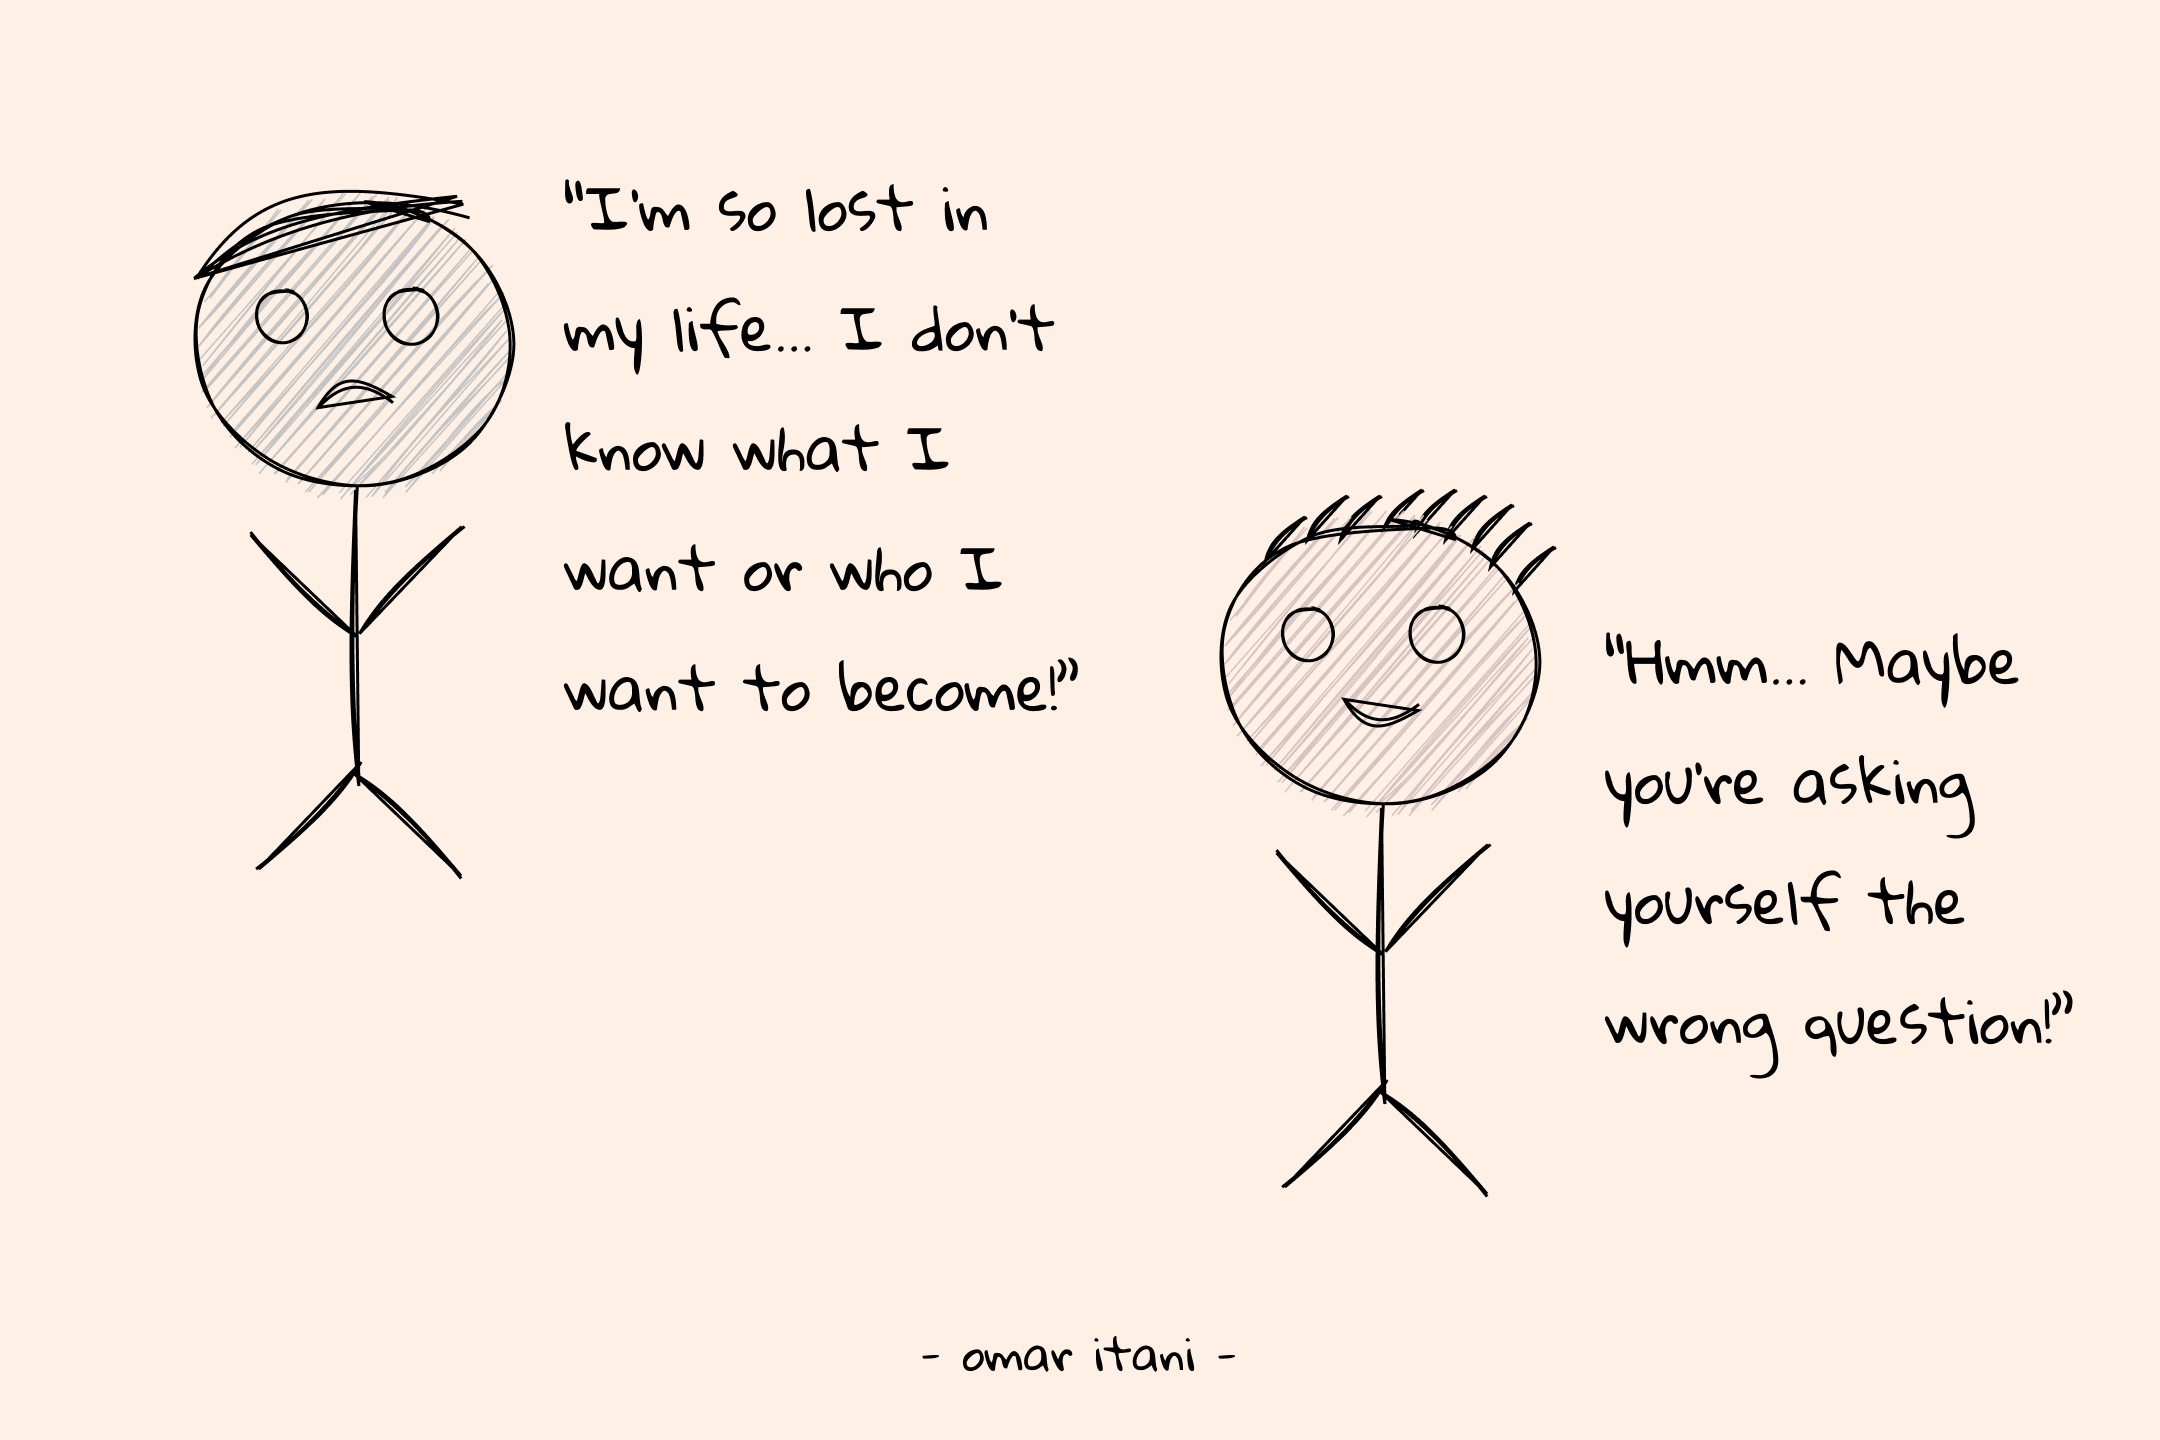 The One Question That Should Guide Your Daily Life: How Do I Want to be  Remembered? — OMAR ITANI